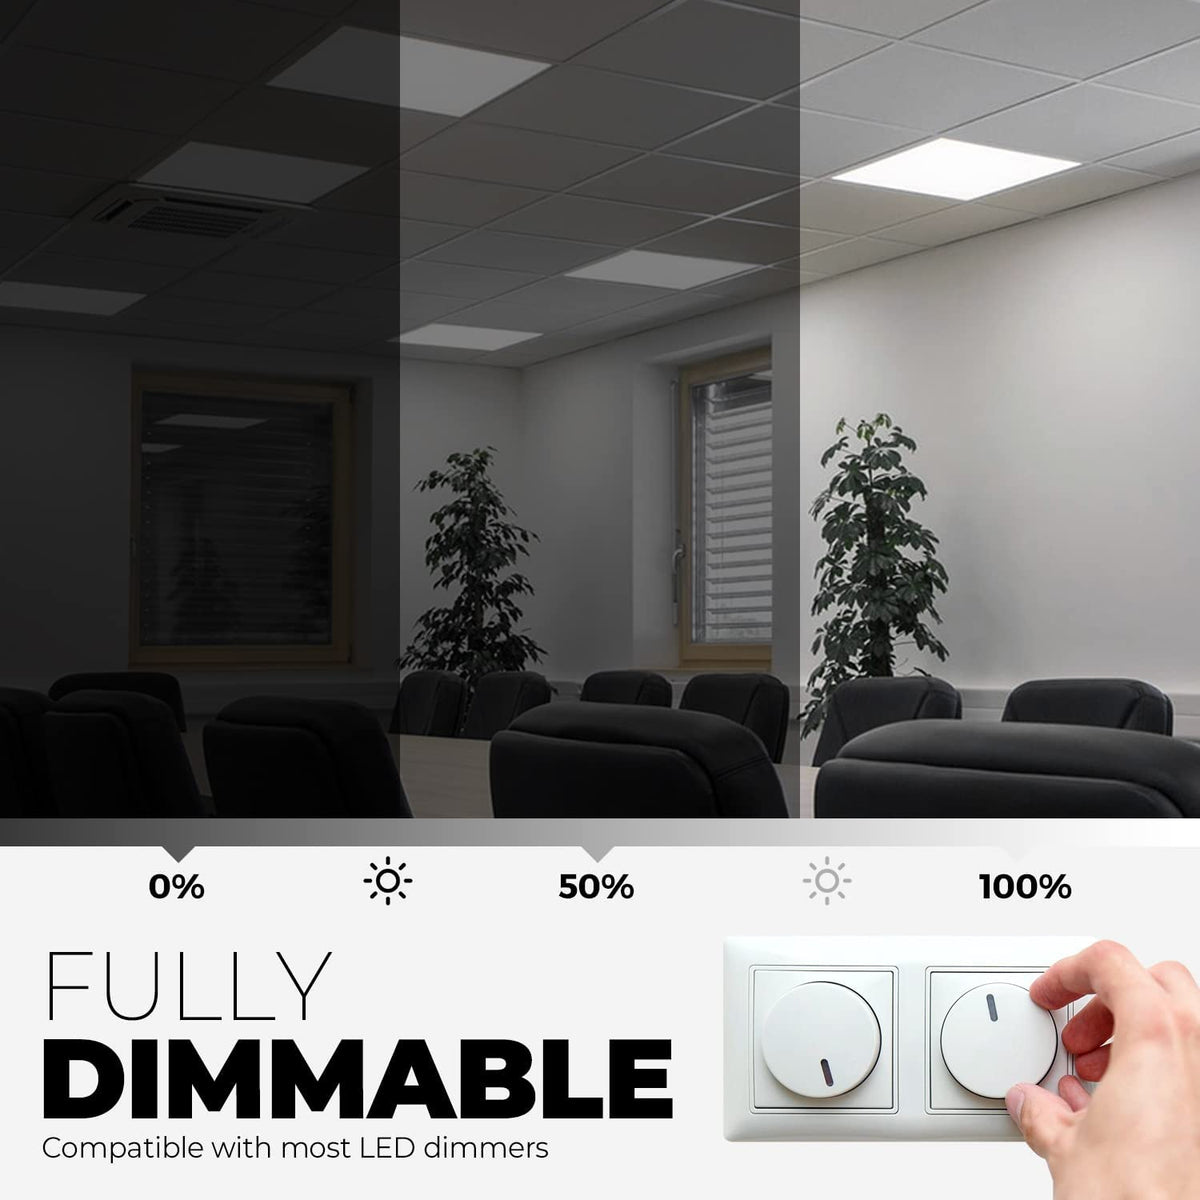 2x4 FT LED Panel Light, 35W/40W/50W, SELECTABLE WATTAGE &amp; CCT, 3CCT, ETL, FC, CE Certified